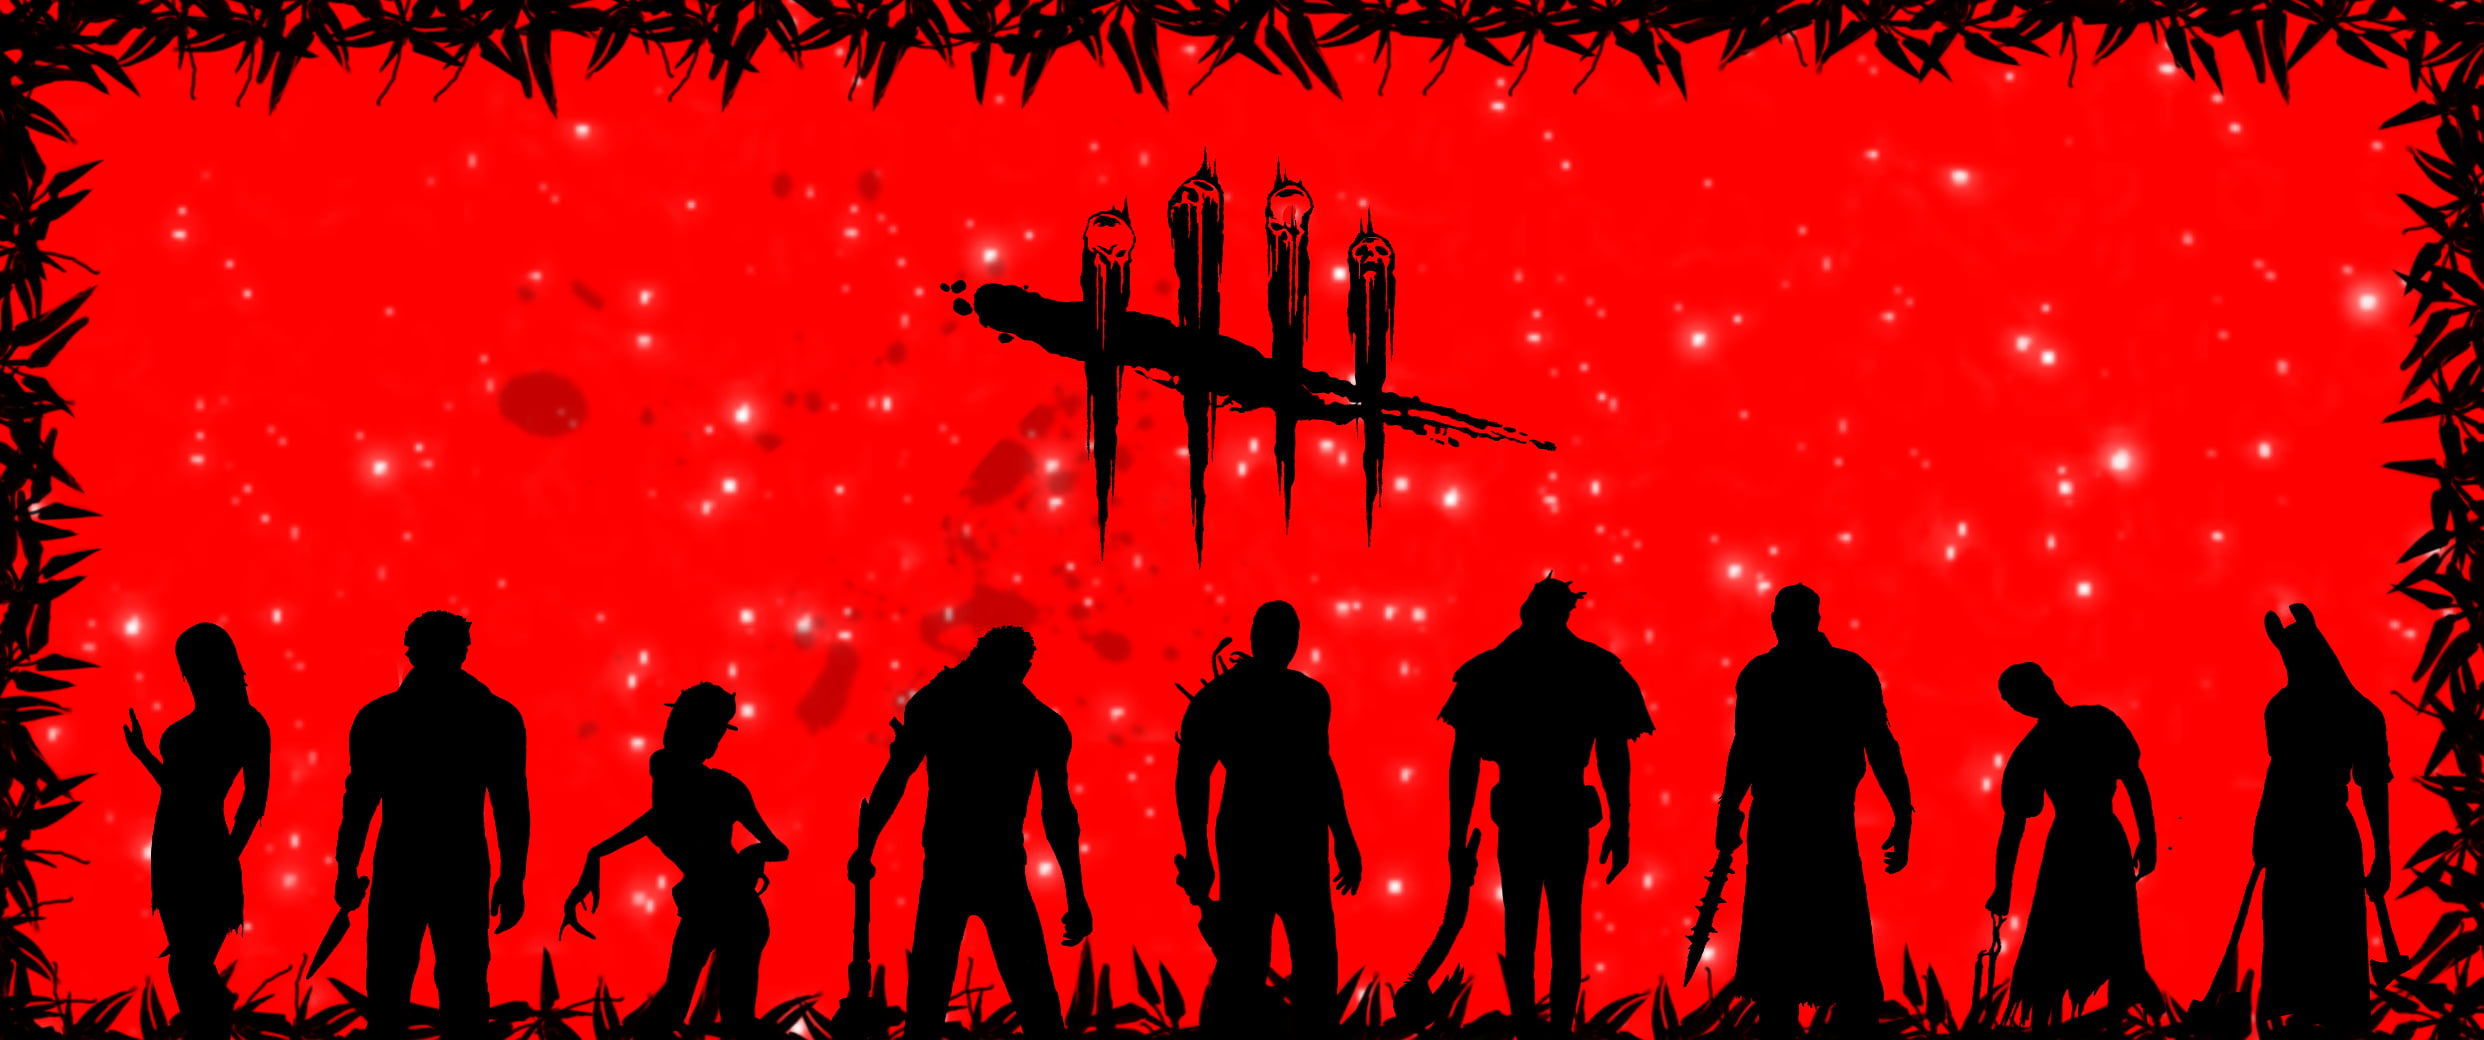 Silhouette Of Cartoon Characters Illustration Dead By Daylight Hd